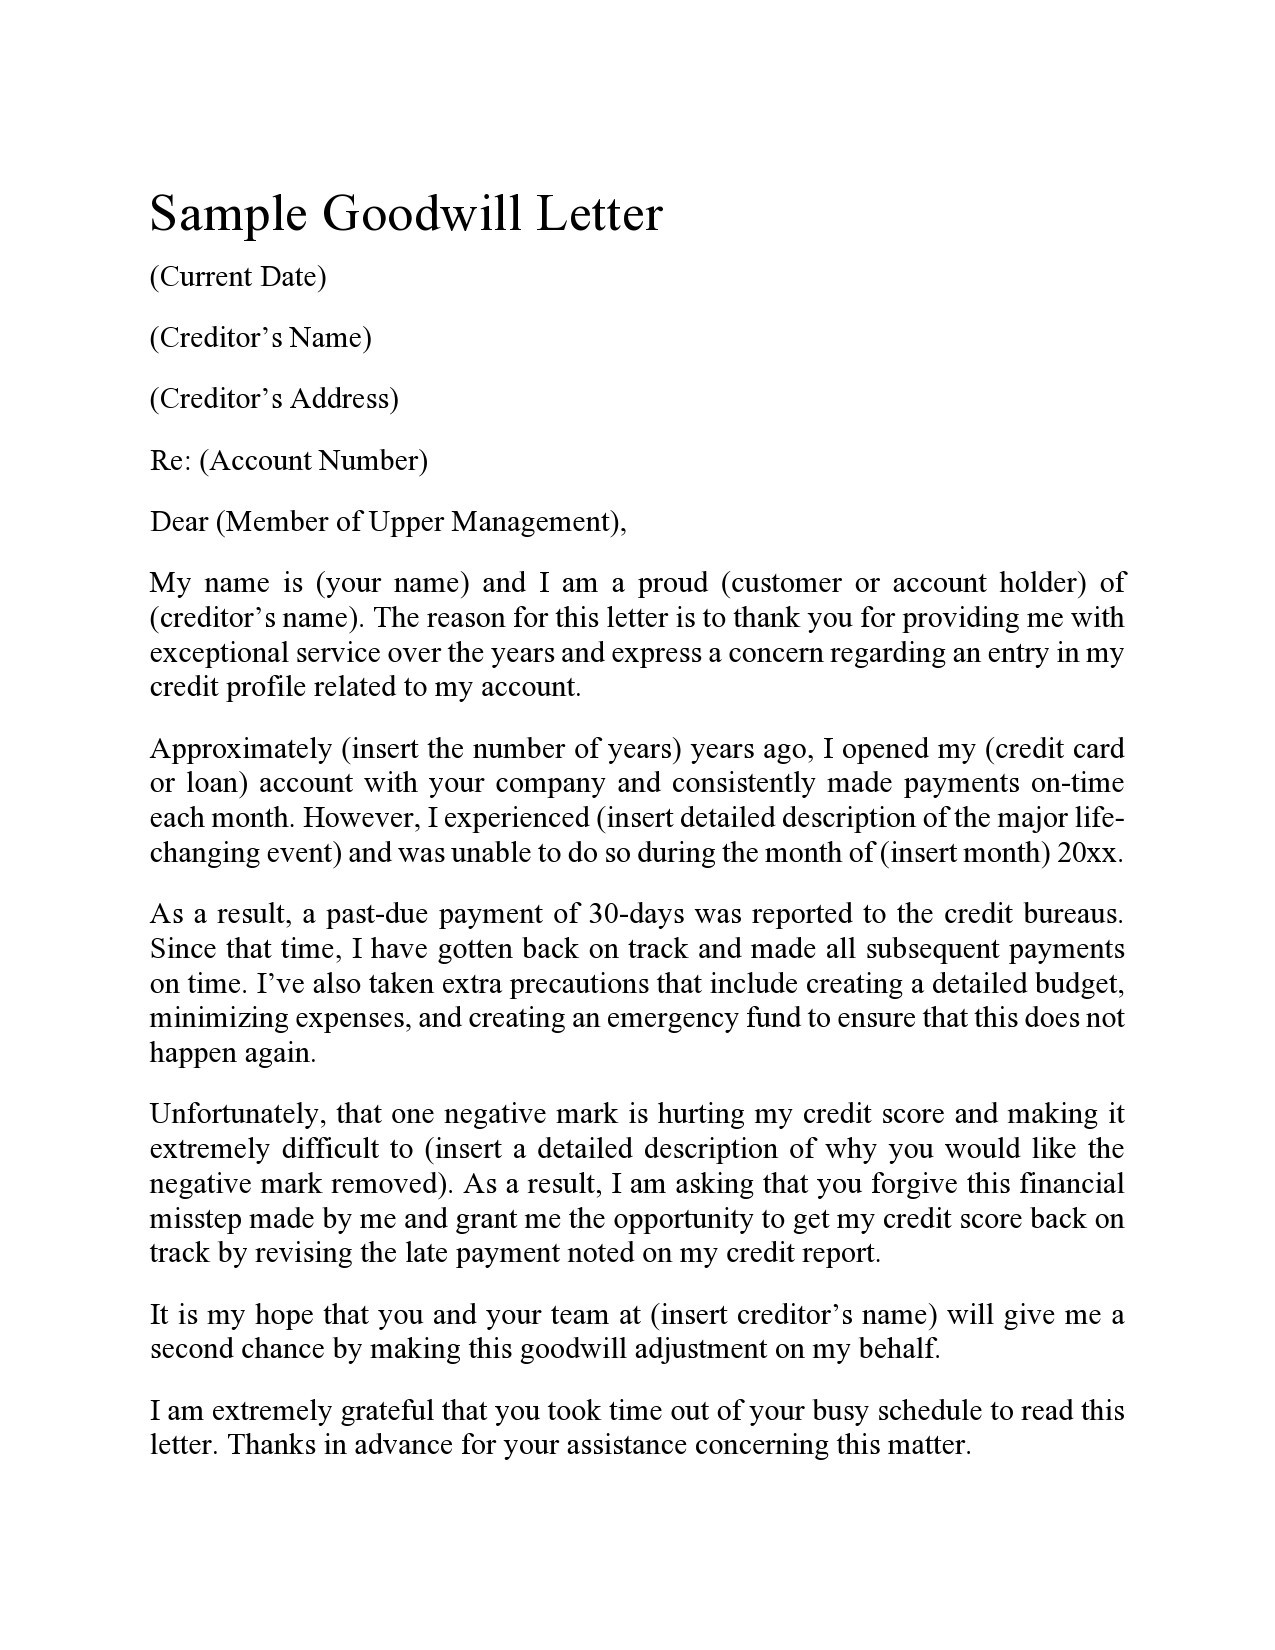 Free goodwill letter template 15